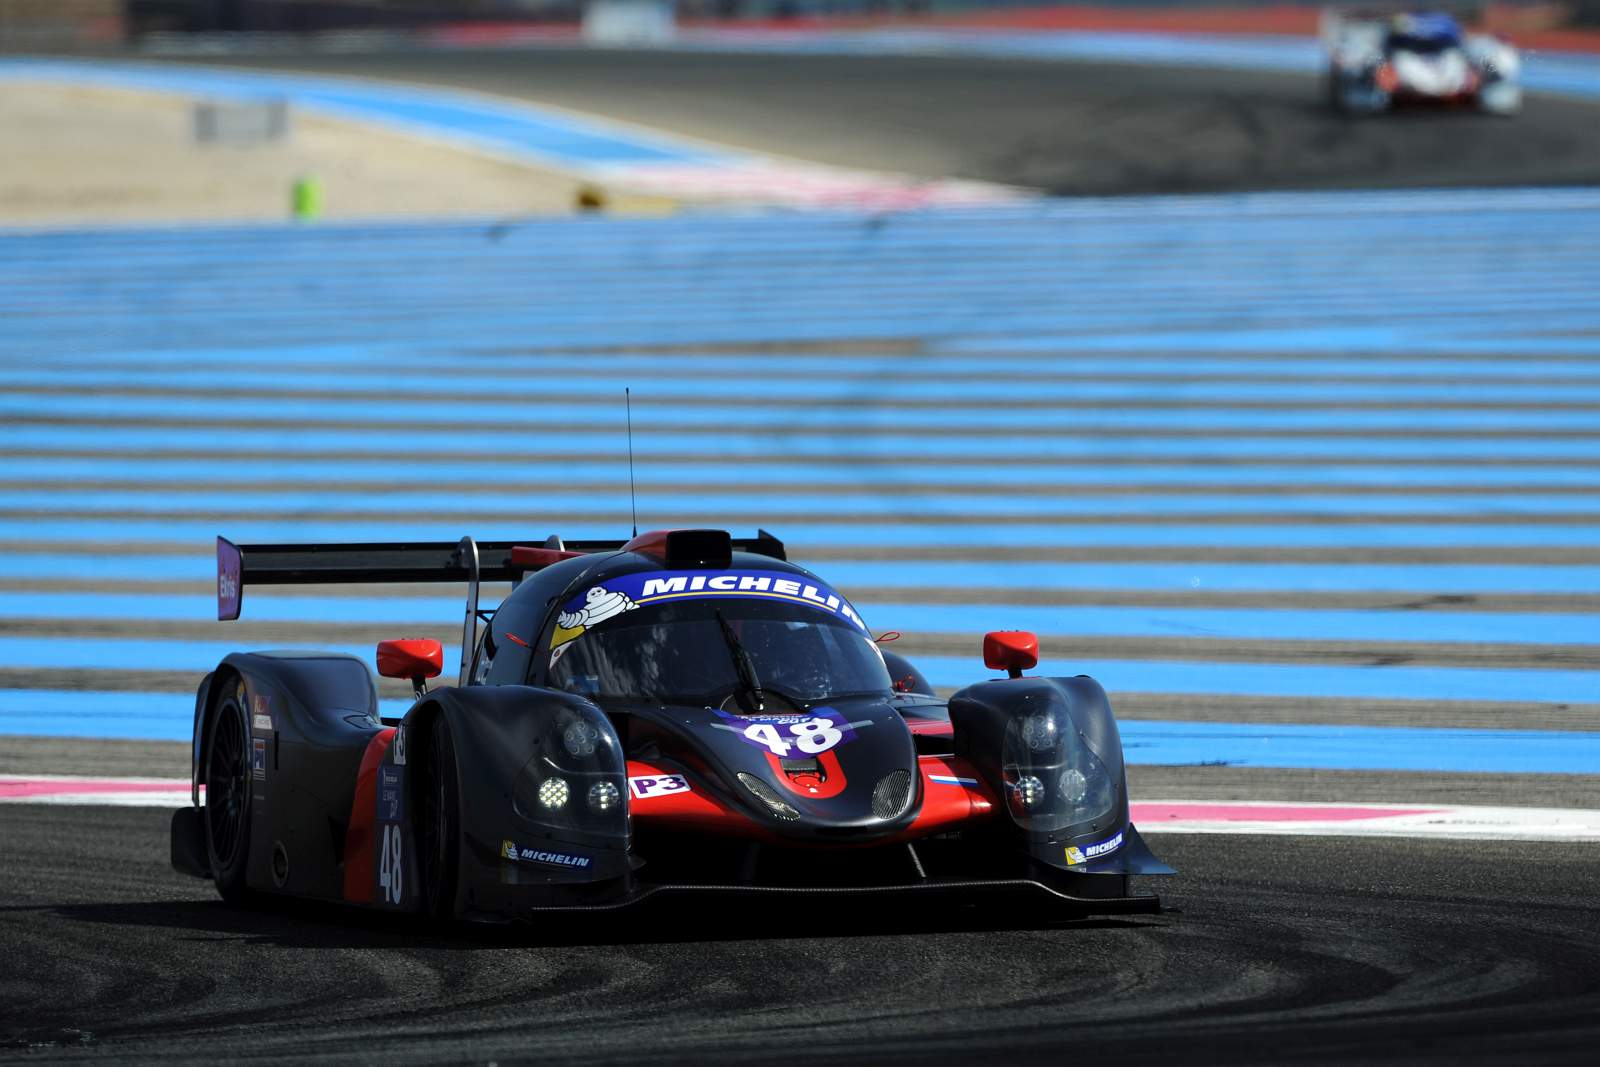 kox-racing-road-to-le-mans-lmp3-002